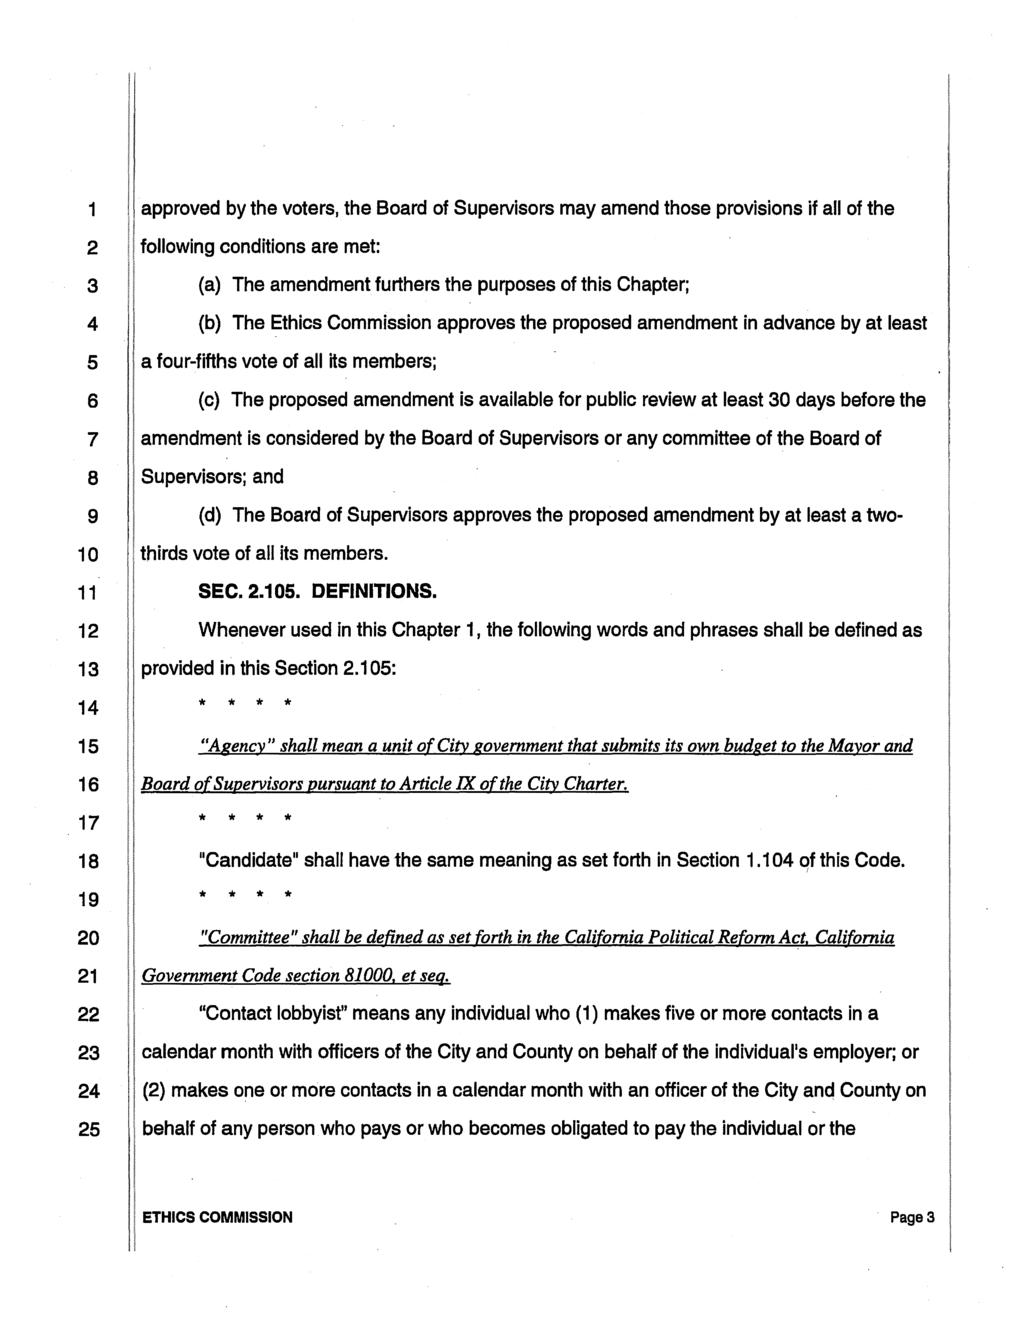 1 2 3 4 5 6 7 8 9 10 12 13 14 15 16 17 18 19 20 21 22 23 24 approved by the voters, the Board of Supervisors may amend those provisions if all of the following conditions are met: (a) The amendment